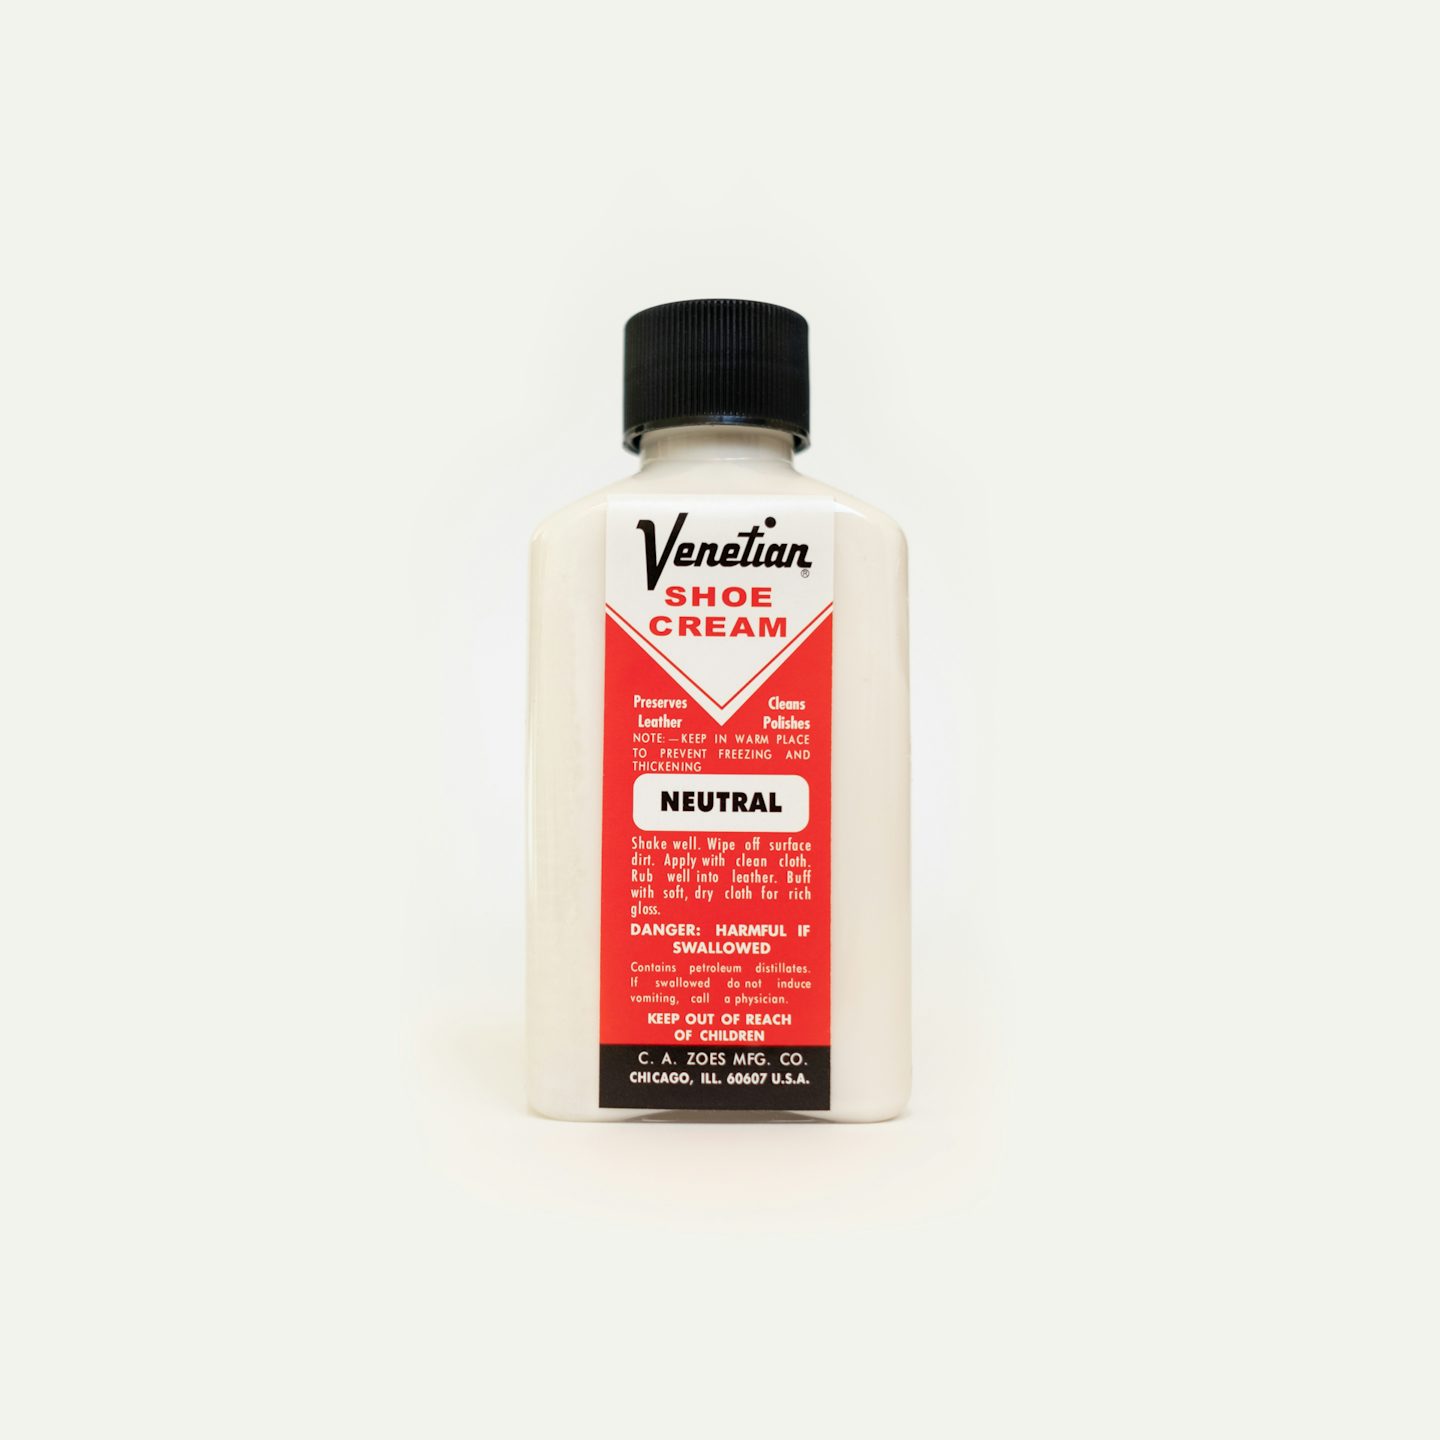 Venetian Shoe Cream - 3oz Bottle - Made in U.S.A. by C.A. ZOES MFG. CO. - View 1